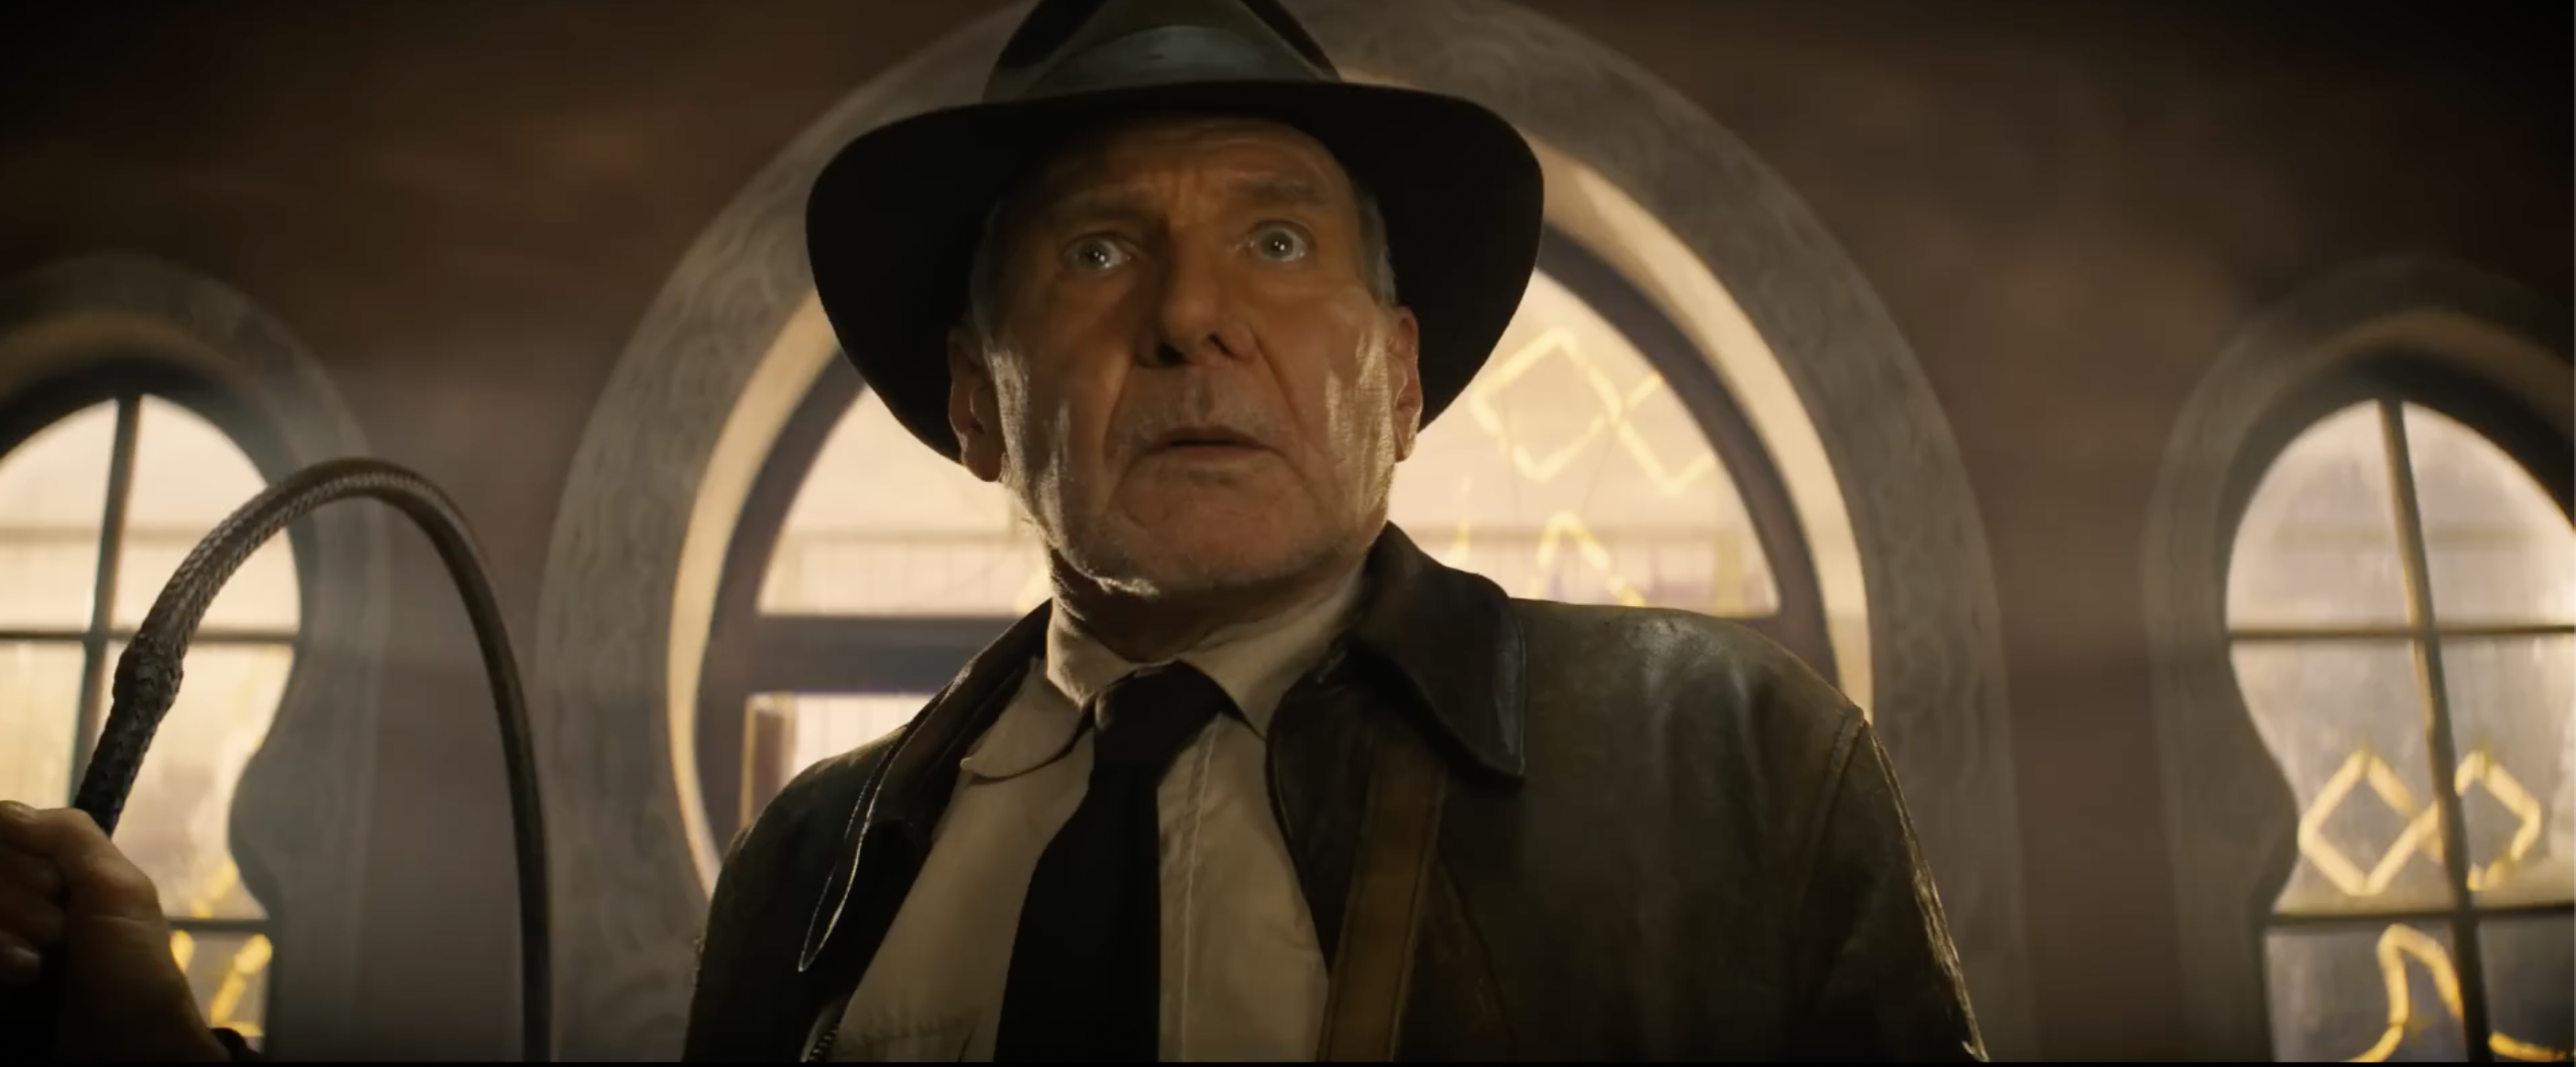 Harrison Ford on the long wait for Indiana Jones 5